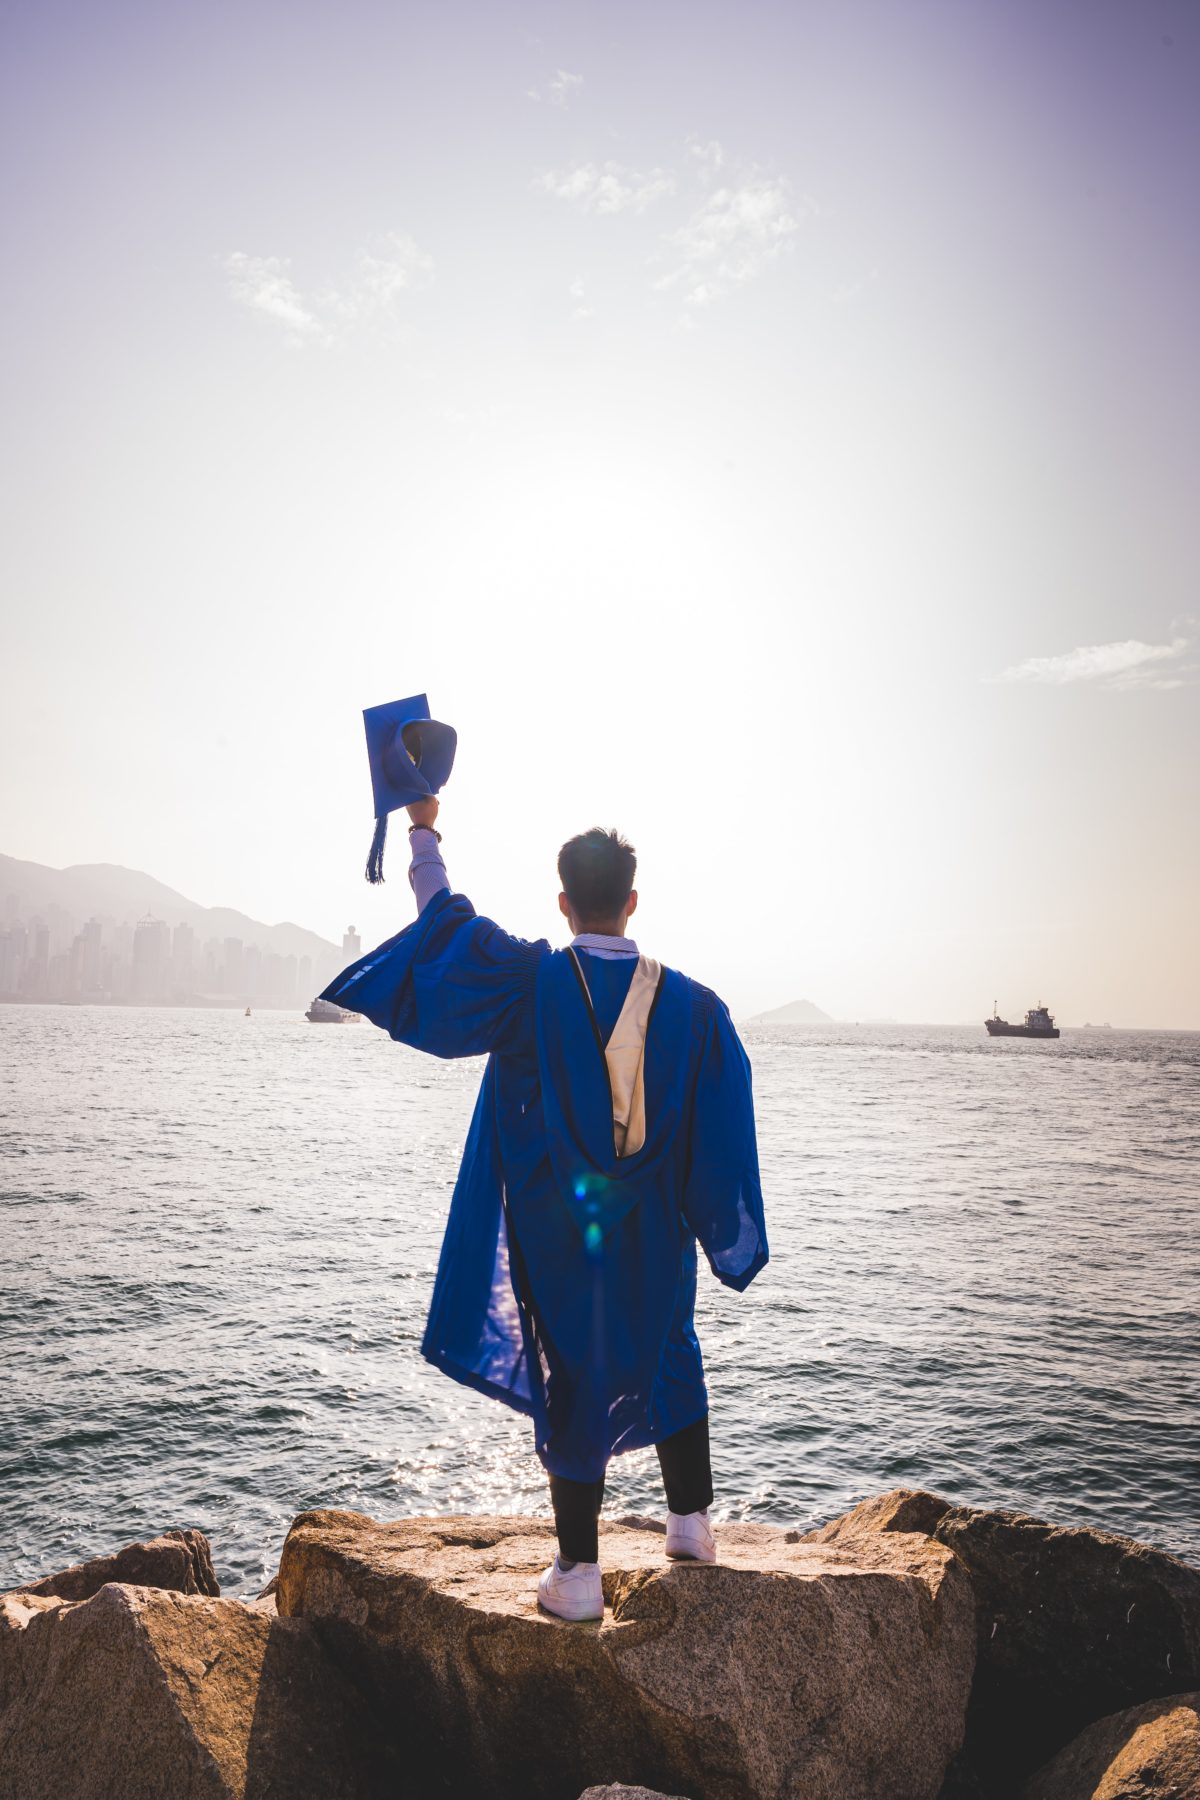 Lighting the Path to Remove Systemic Barriers in Higher Education and Award Earned Postsecondary Credentials through IHEP’s Degrees When Due Initiative